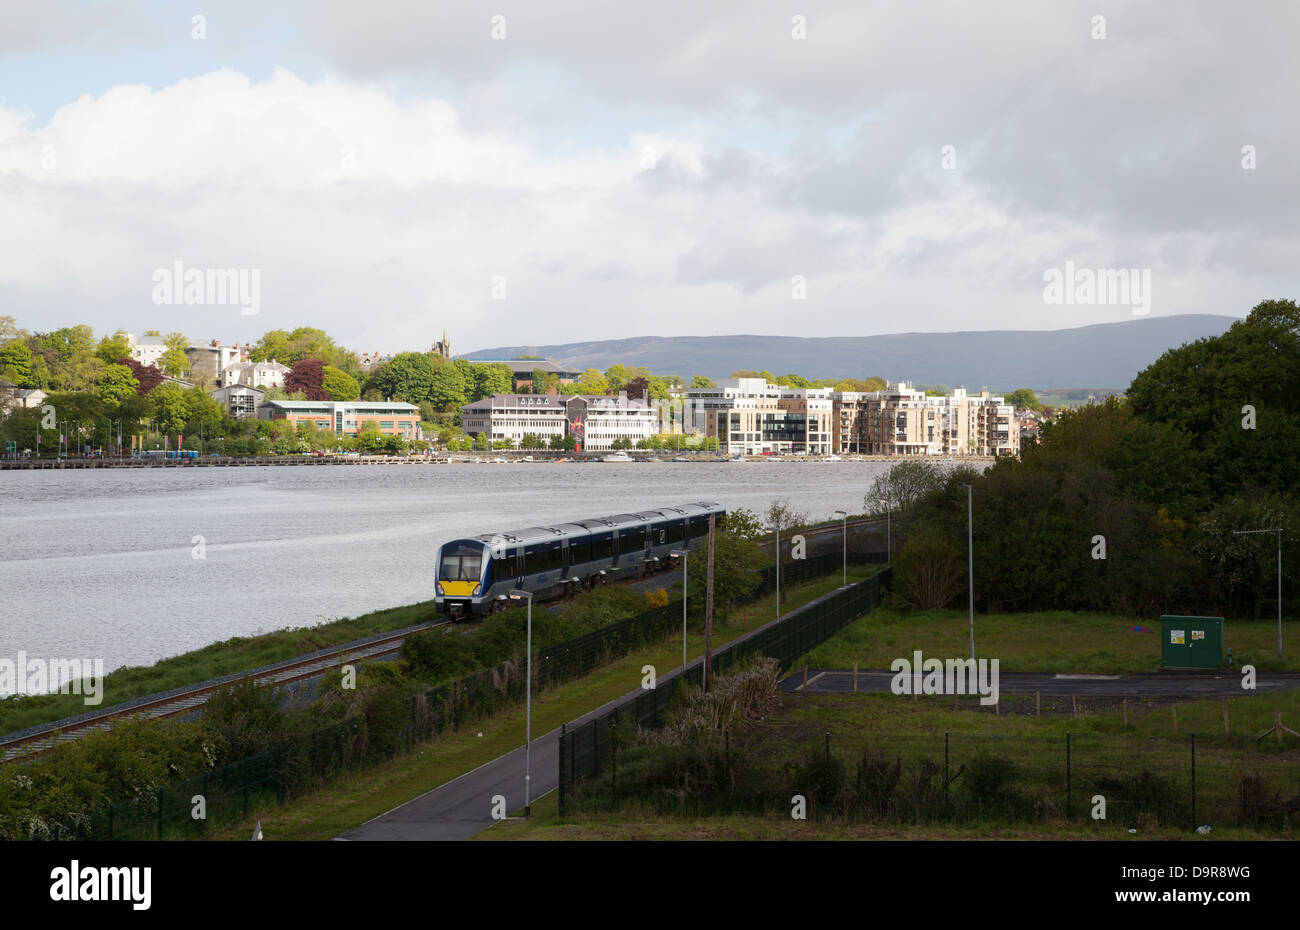 Belfast train leaving Derry Londonderry with Derry Council building in background Derry Londonderry Northern Ireland Stock Photo